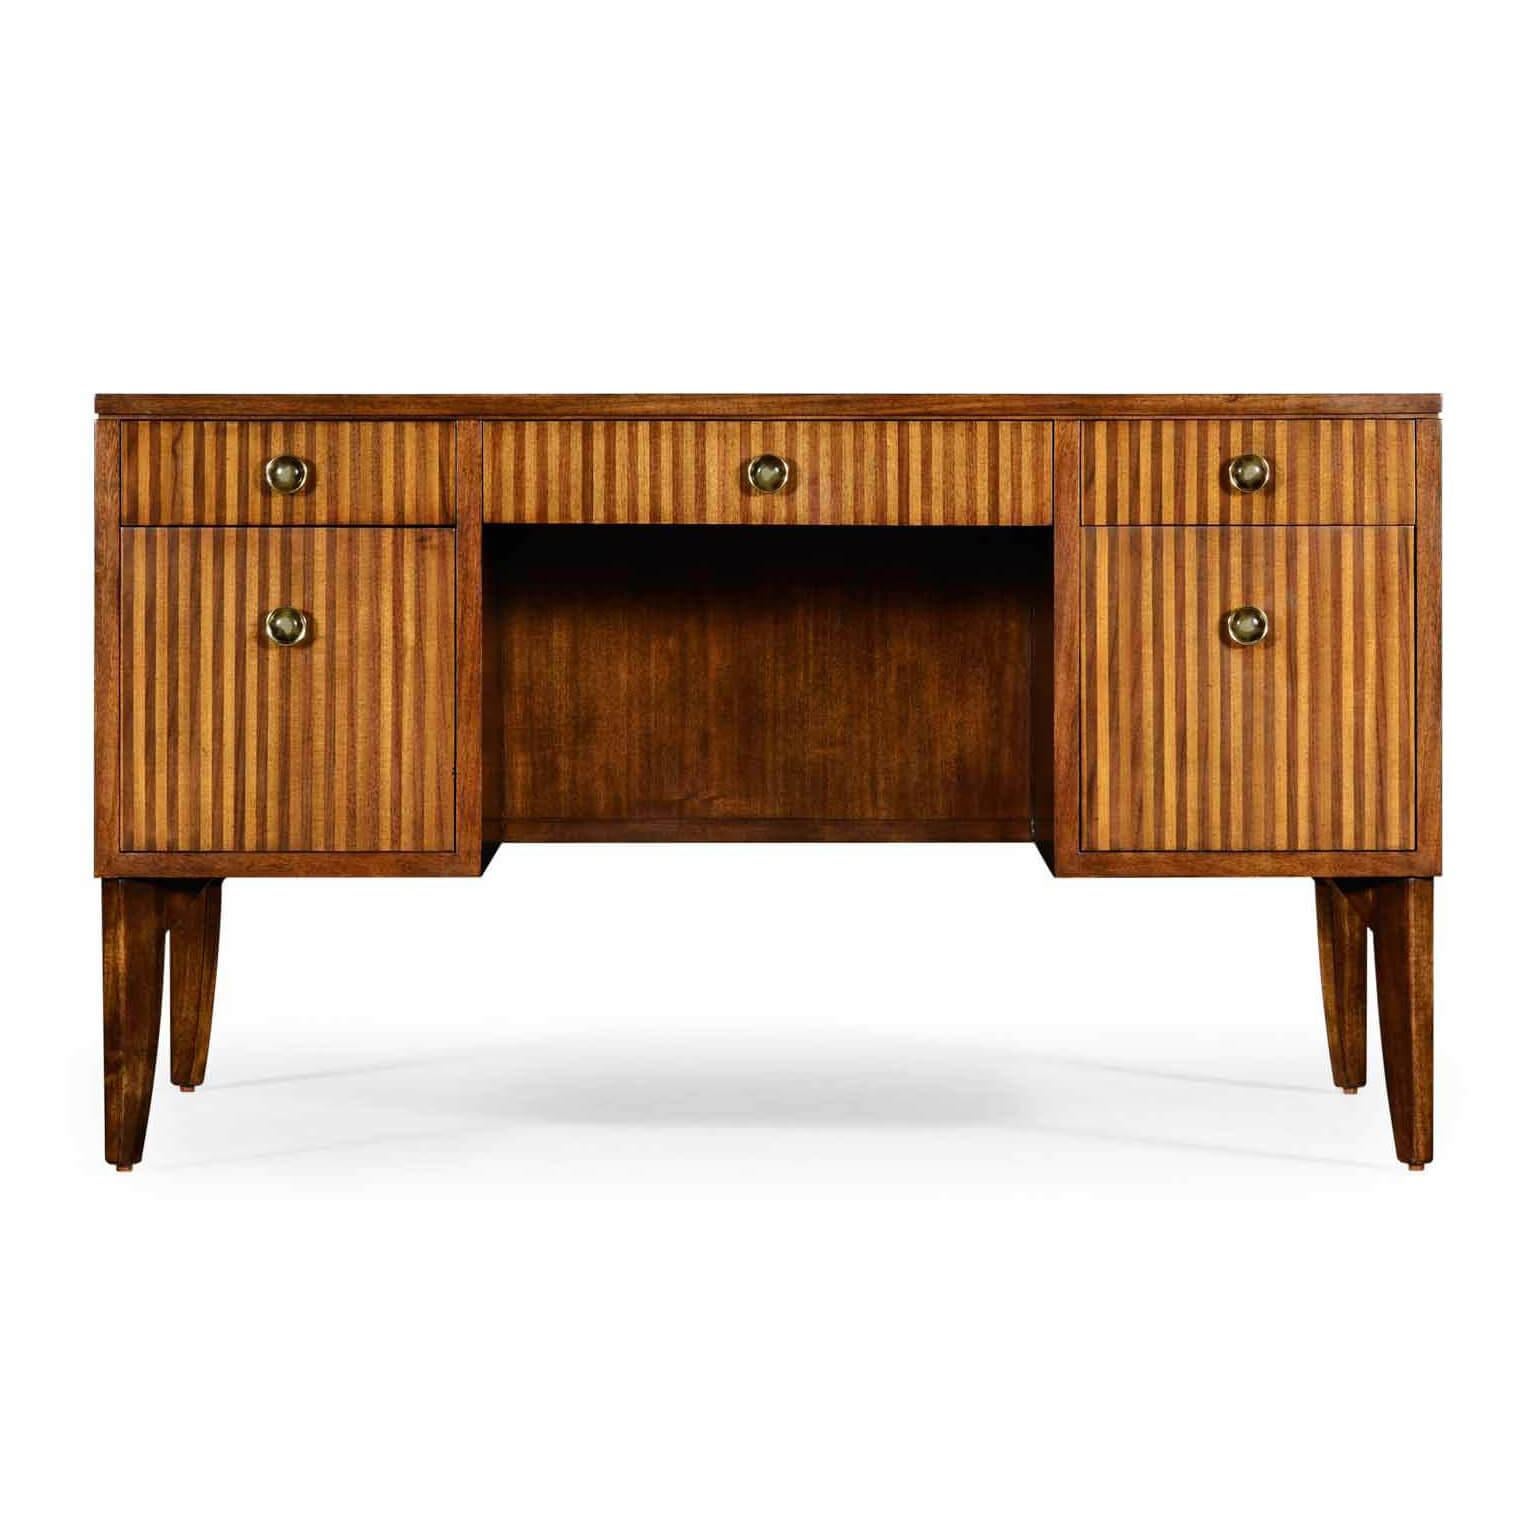 An unusual walnut leather top French Modern desk, with a handcrafted inset leather top, candy stripe inlaid front panels, crotch walnut sides, with five drawers each with a round Horn button pulls, on slightly splayed French legs with paisley drawer